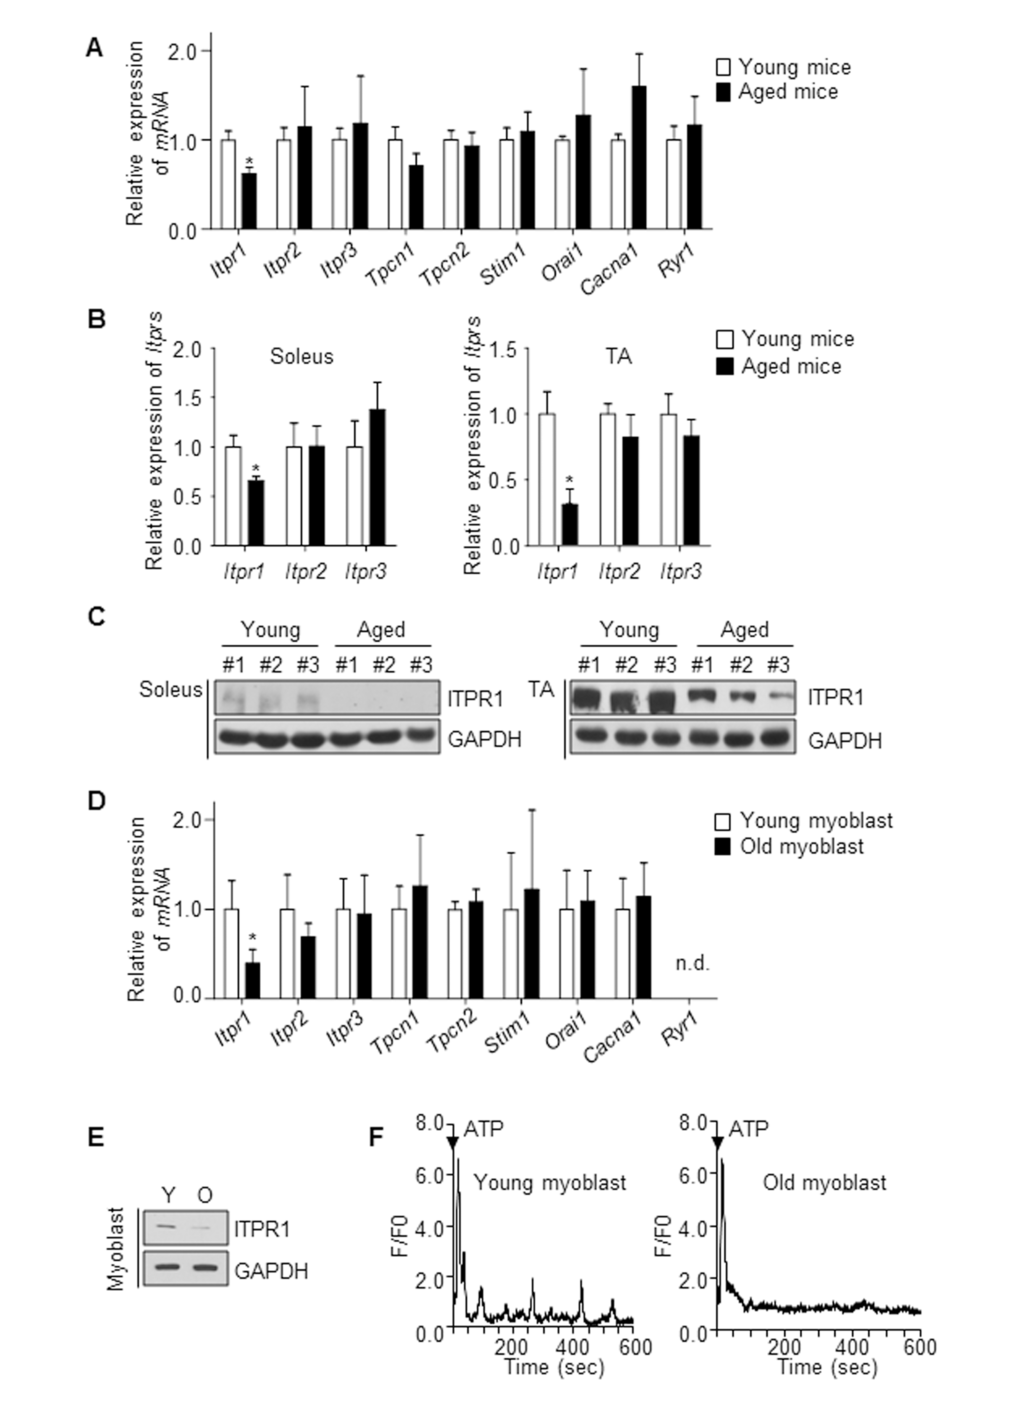 ITPR1 levels are decreased in aged skeletal muscle. (A) qRT-PCR analysis of mRNA levels of Ca2+ regulatory genes, relative to 36b4, in young (6 months) and aged (28 months) mice gastrocnemius muscle. n = 5 for each group. (B) qRT-PCR analysis of Itpr mRNA levels, relative to 36b4, from soleus and TA muscles of young (isolated from 6 month-old mice) and aged (isolated from 28 month-old mice) mice. n = 5 for each group. (C) Immunoblot analysis of ITPR1 protein levels from soleus and TA muscles of young and aged mice, with GAPDH as the loading control. n = 3 for each group. (D) qRT-PCR analysis of mRNA levels of Ca2+ regulatory genes, relative to 36b4, in young (isolated from 3 month-old mice) and old (isolated from 28 month-old mice) primary myoblasts. n = 5 for each group. (E) Immunoblot analysis of ITPR1 protein levels in young and old primary myoblasts, with GAPDH as the loading control. (F) Measurement of extracellular ATP (1 mM)-induced Ca2+ oscillations in a single myoblast from young and old primary myoblast cultures. F/F0 represents the change in fluorescence normalized to resting fluorescence (F0).